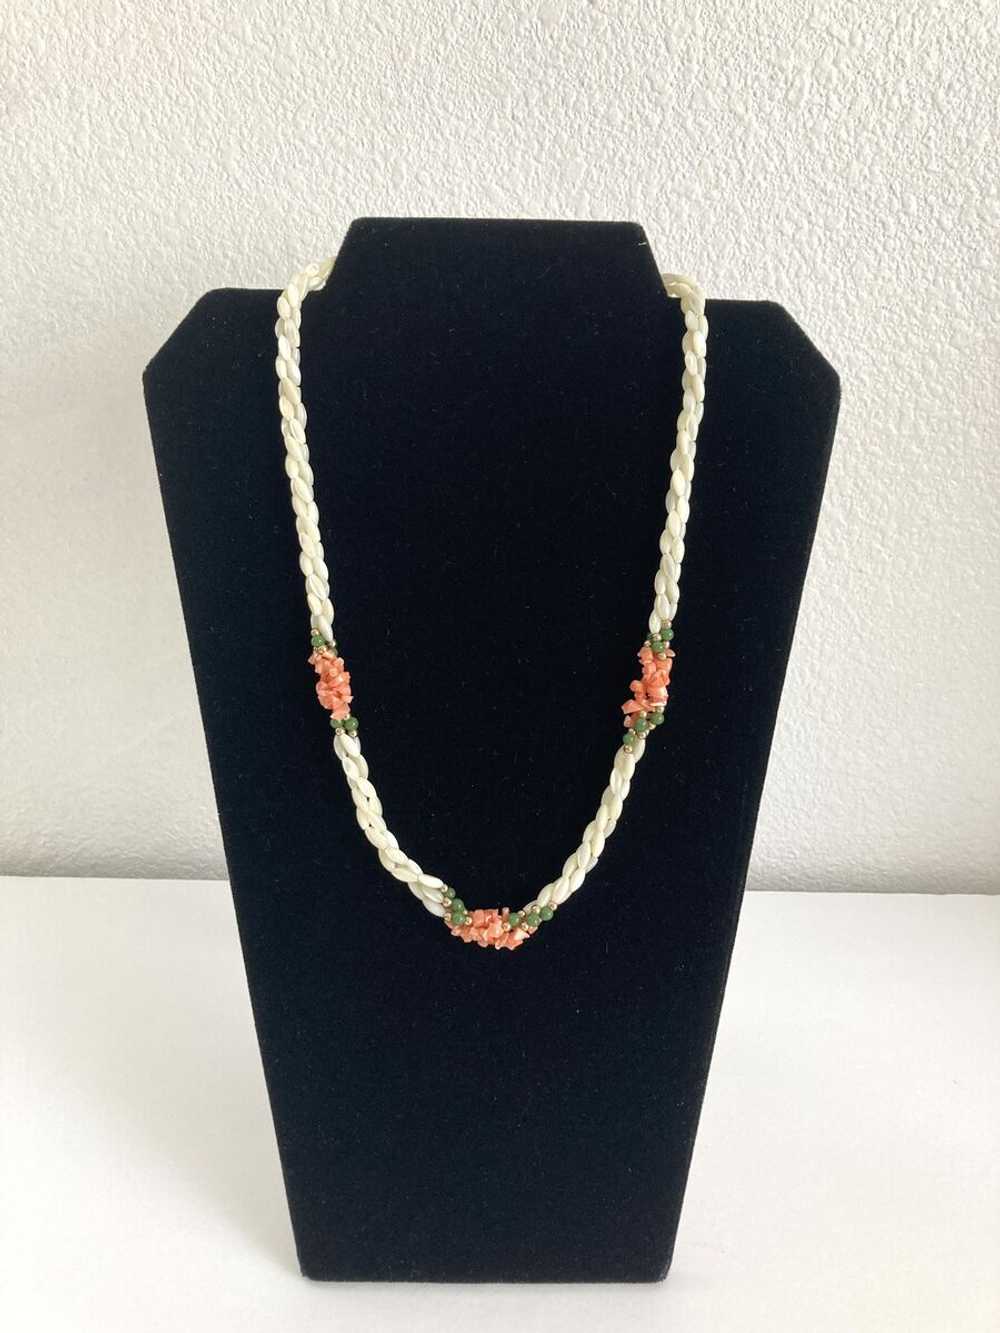 Mother of Pearl, Coral, & Jade Necklace - image 4